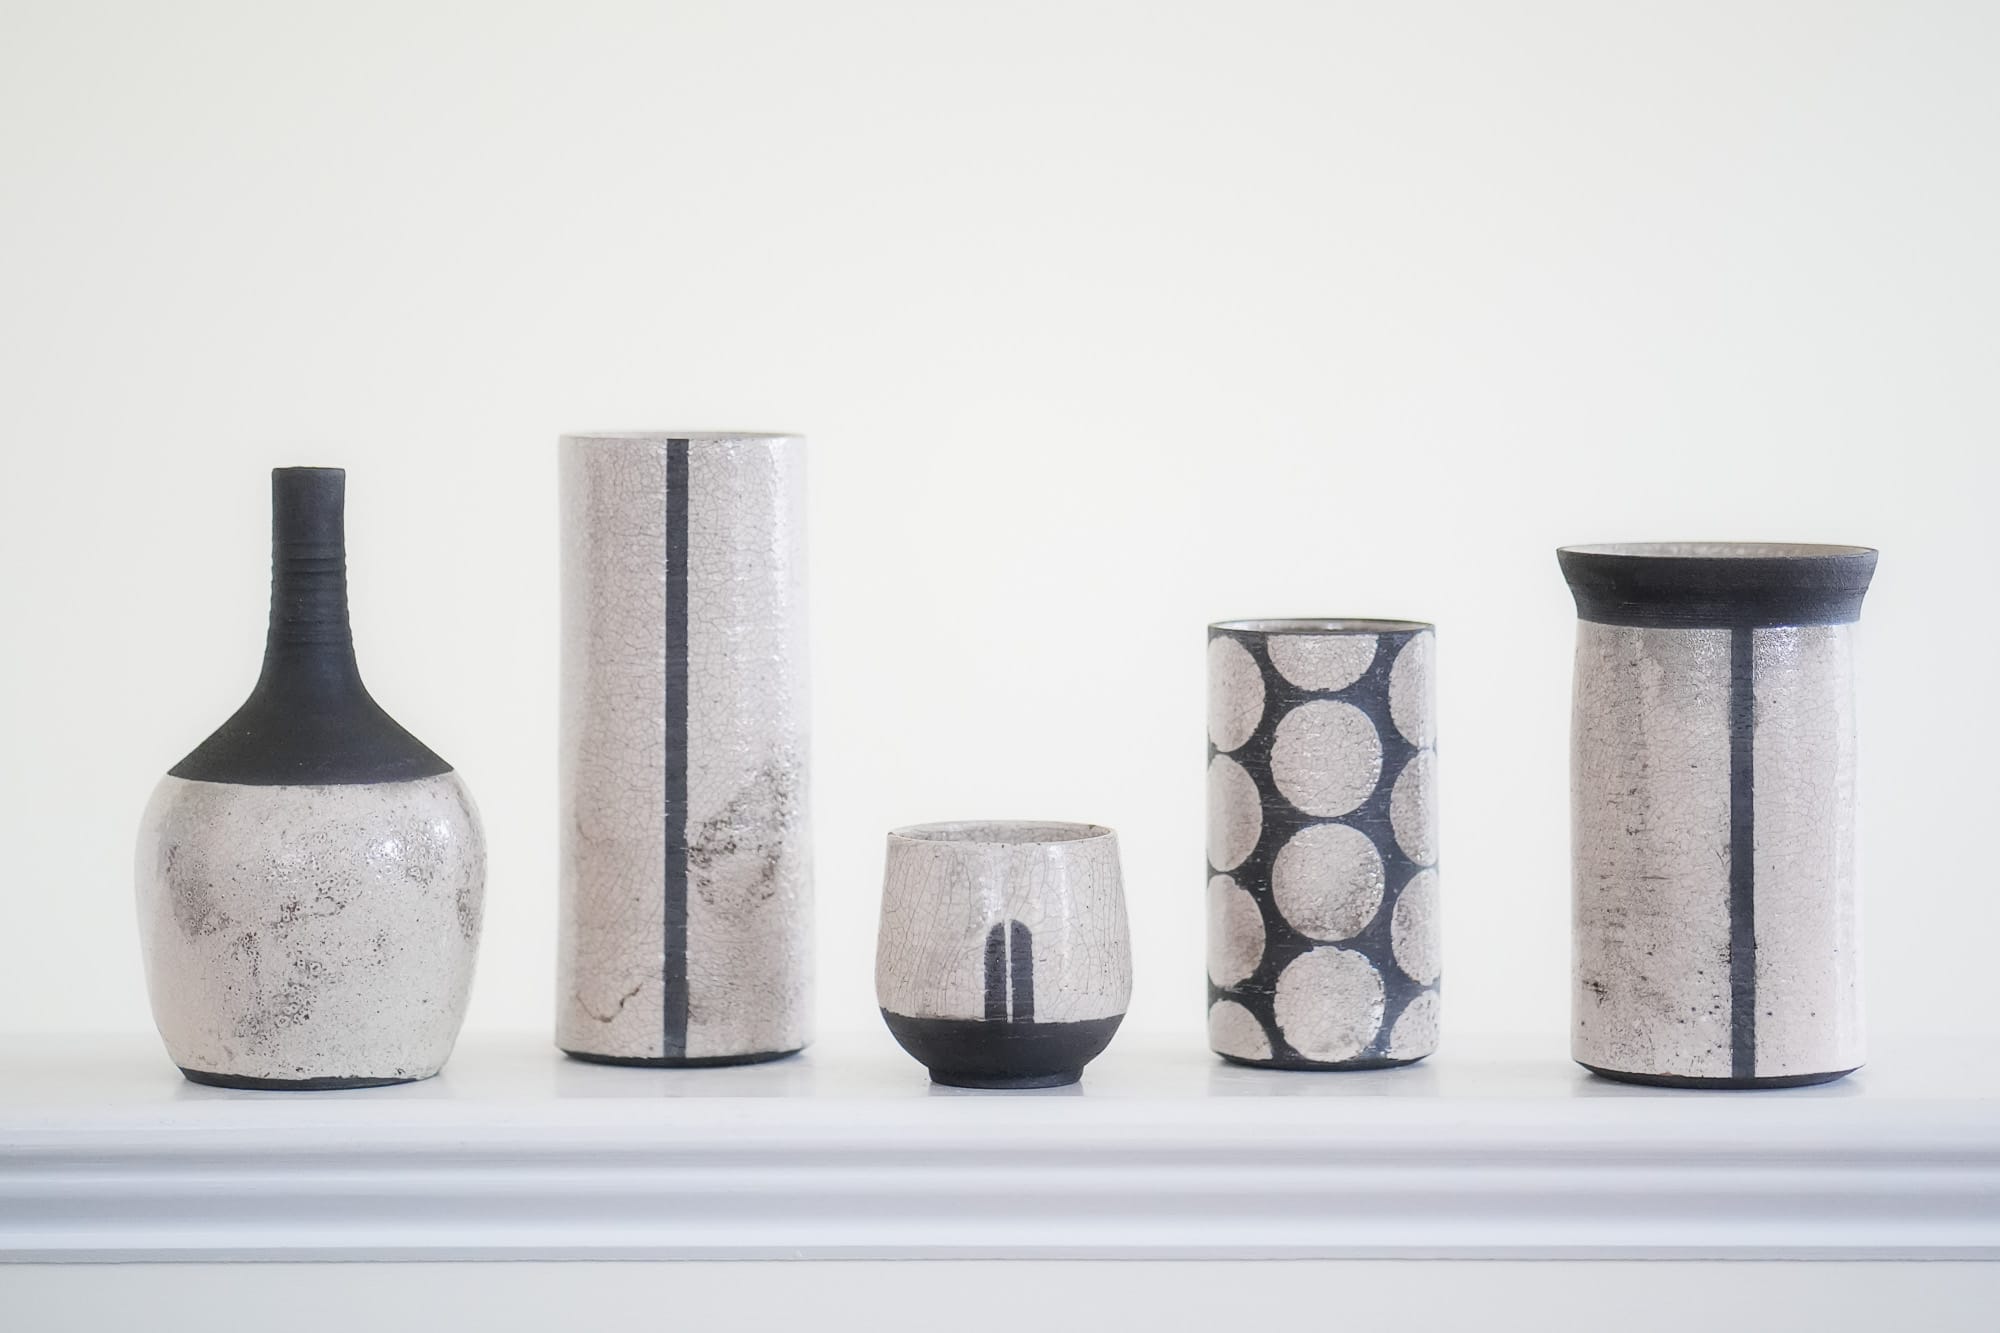 photo of five black and white raku-fired pottery vases in various shapes and sizes